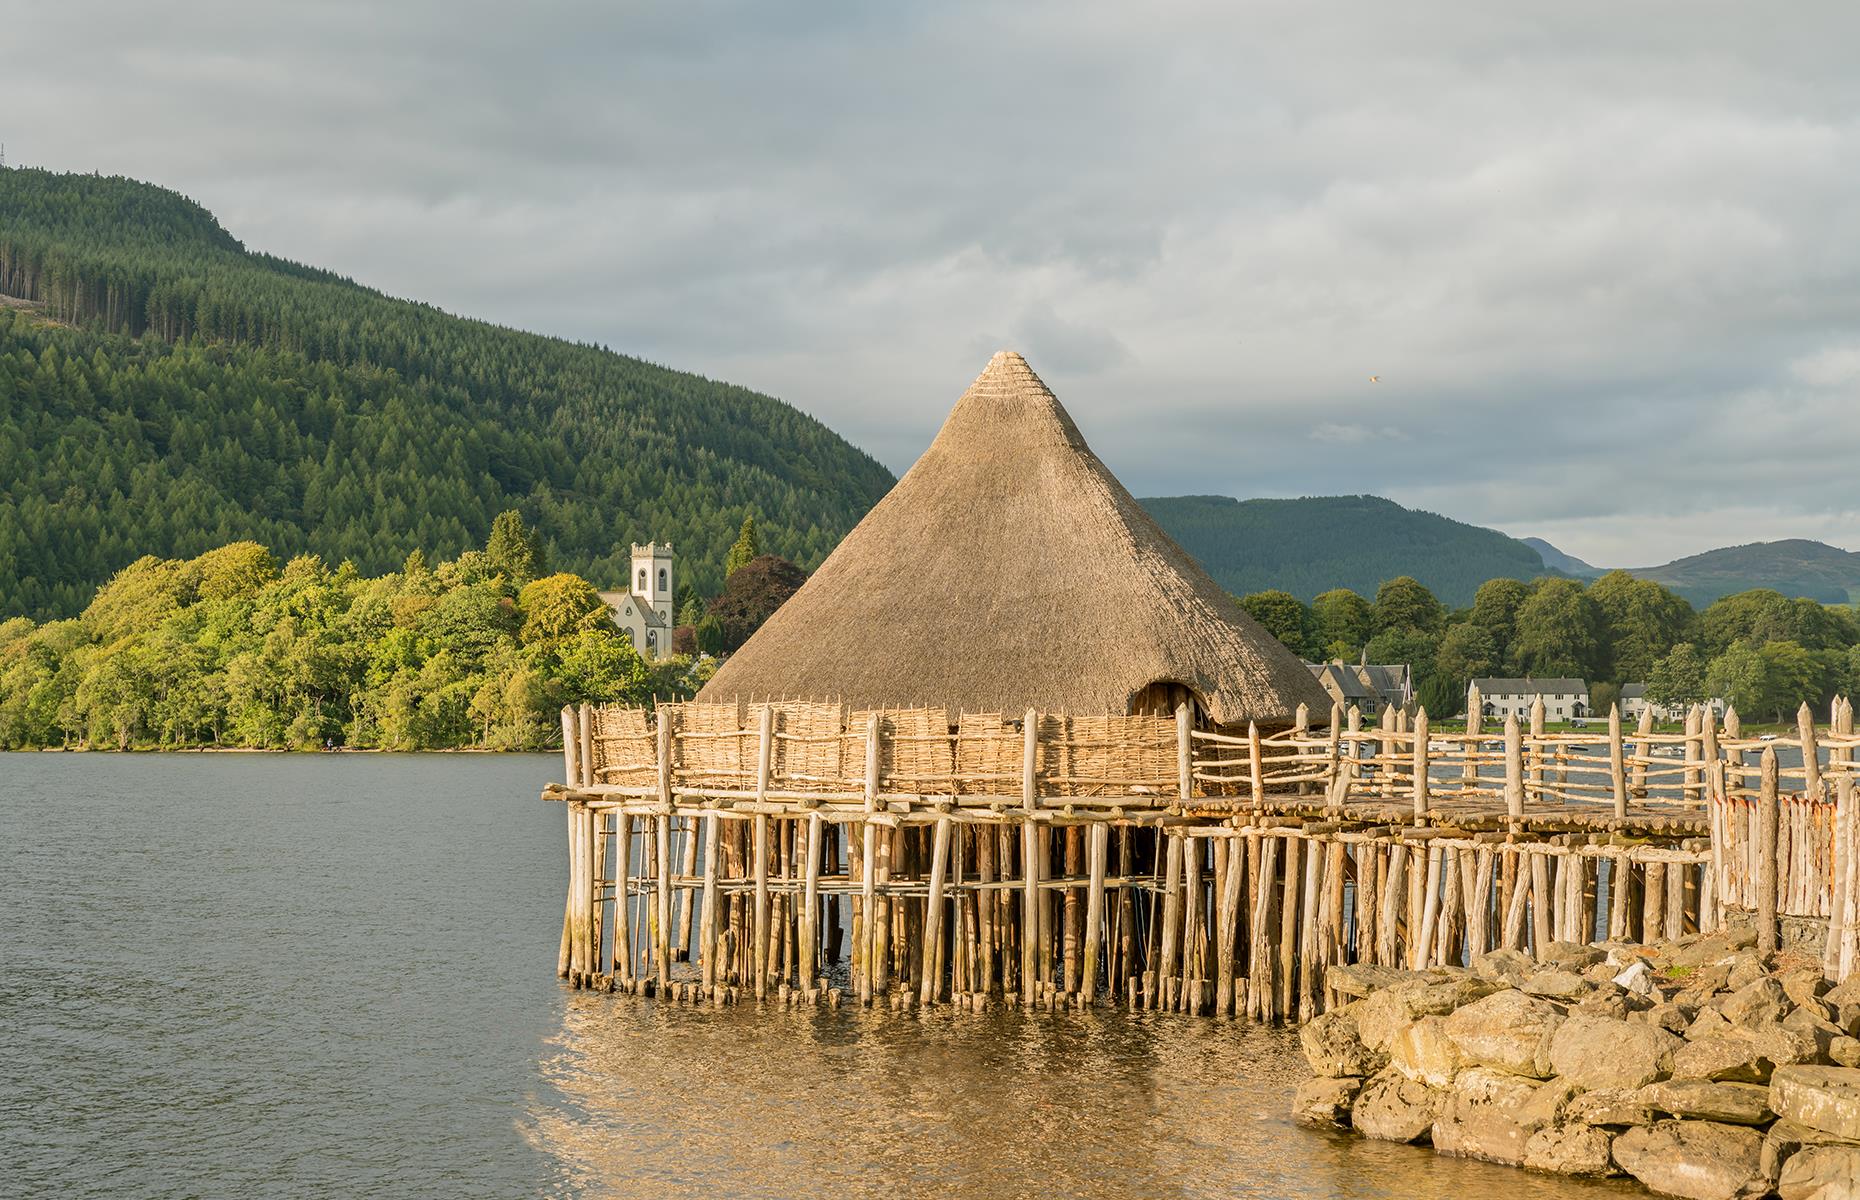 <p>For kids, nothing brings history to life more than seeing the real thing. Set on the banks of the beautiful Loch Tay, <a href="https://crannog.co.uk/">the Scottish Crannog Centre</a> displays original artefacts used by the Iron Age people who lived in these overwater houses some 2,500 years ago – from butter dishes to stringed instruments. Your family can also watch textile-making, cooking and craft demonstrations, or head out onto the waters of the Loch itself in a replica longboat.</p>